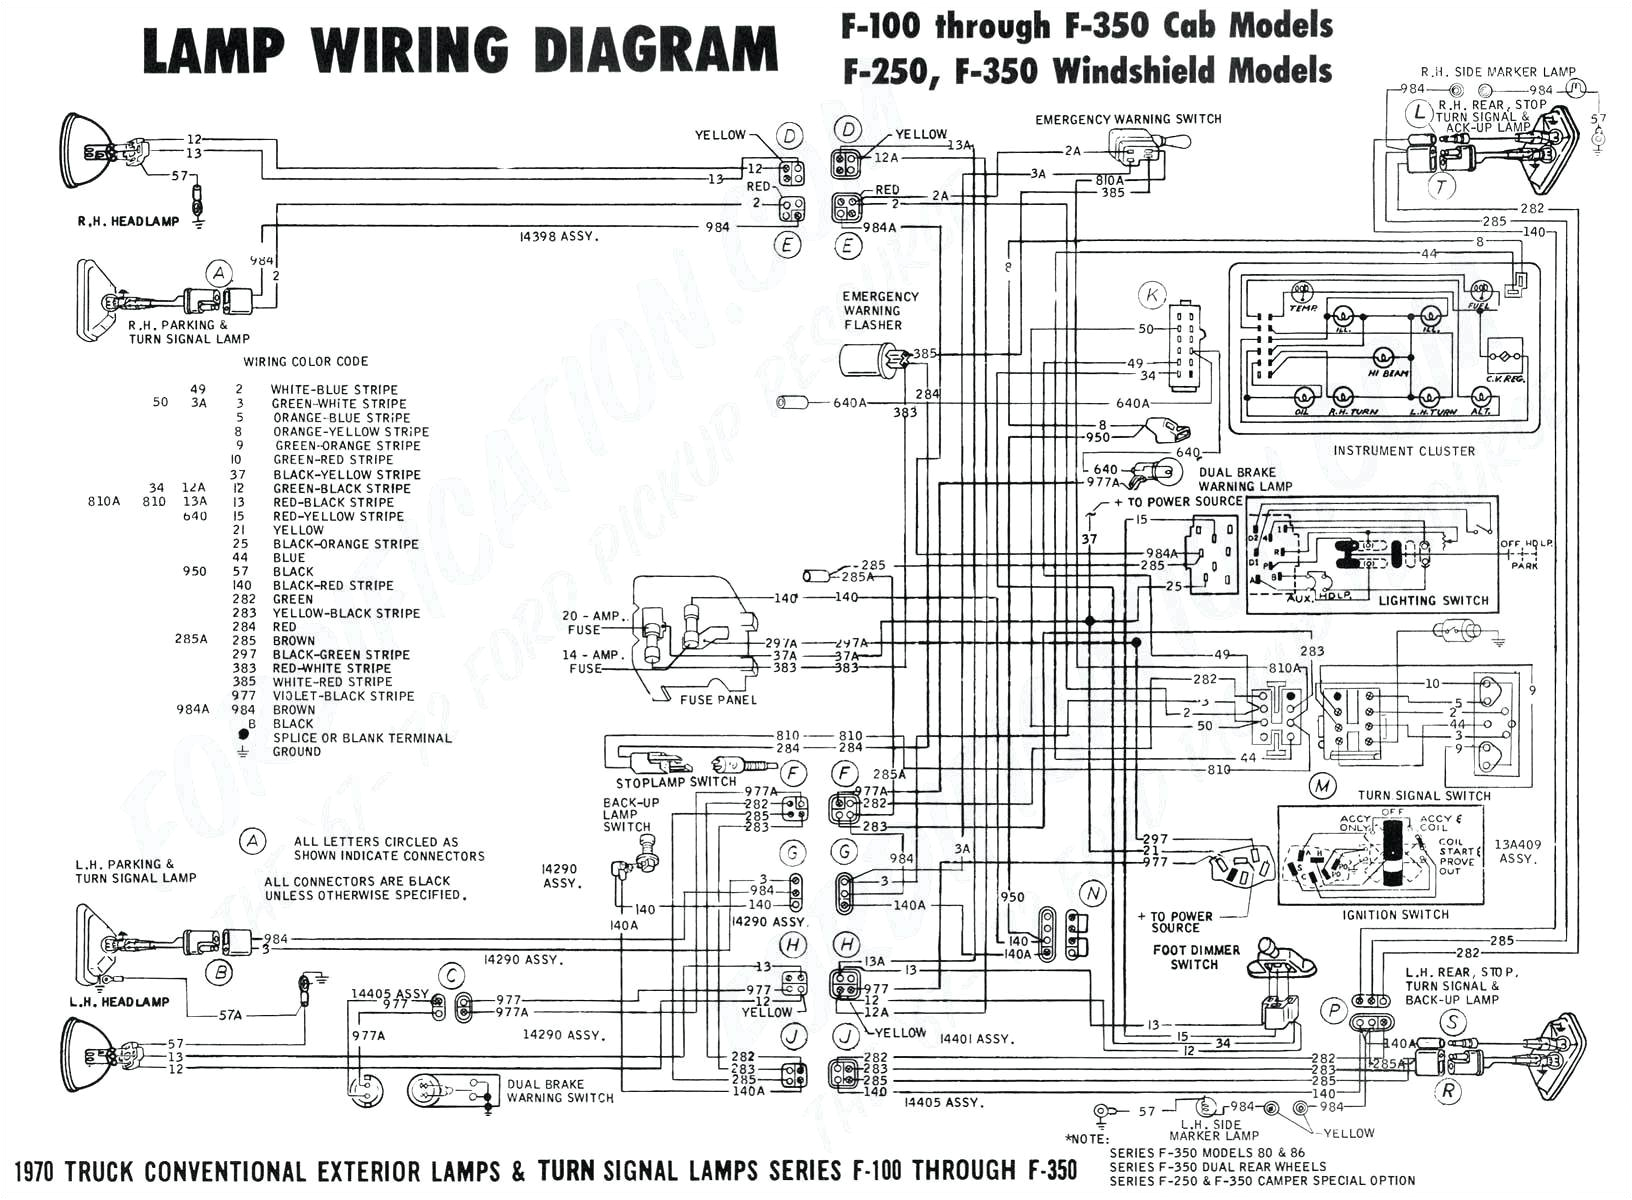 1999 ford f250 fuel pump wiring diagram share circuit diagrams 1999 ford f250 fuel pump wiring